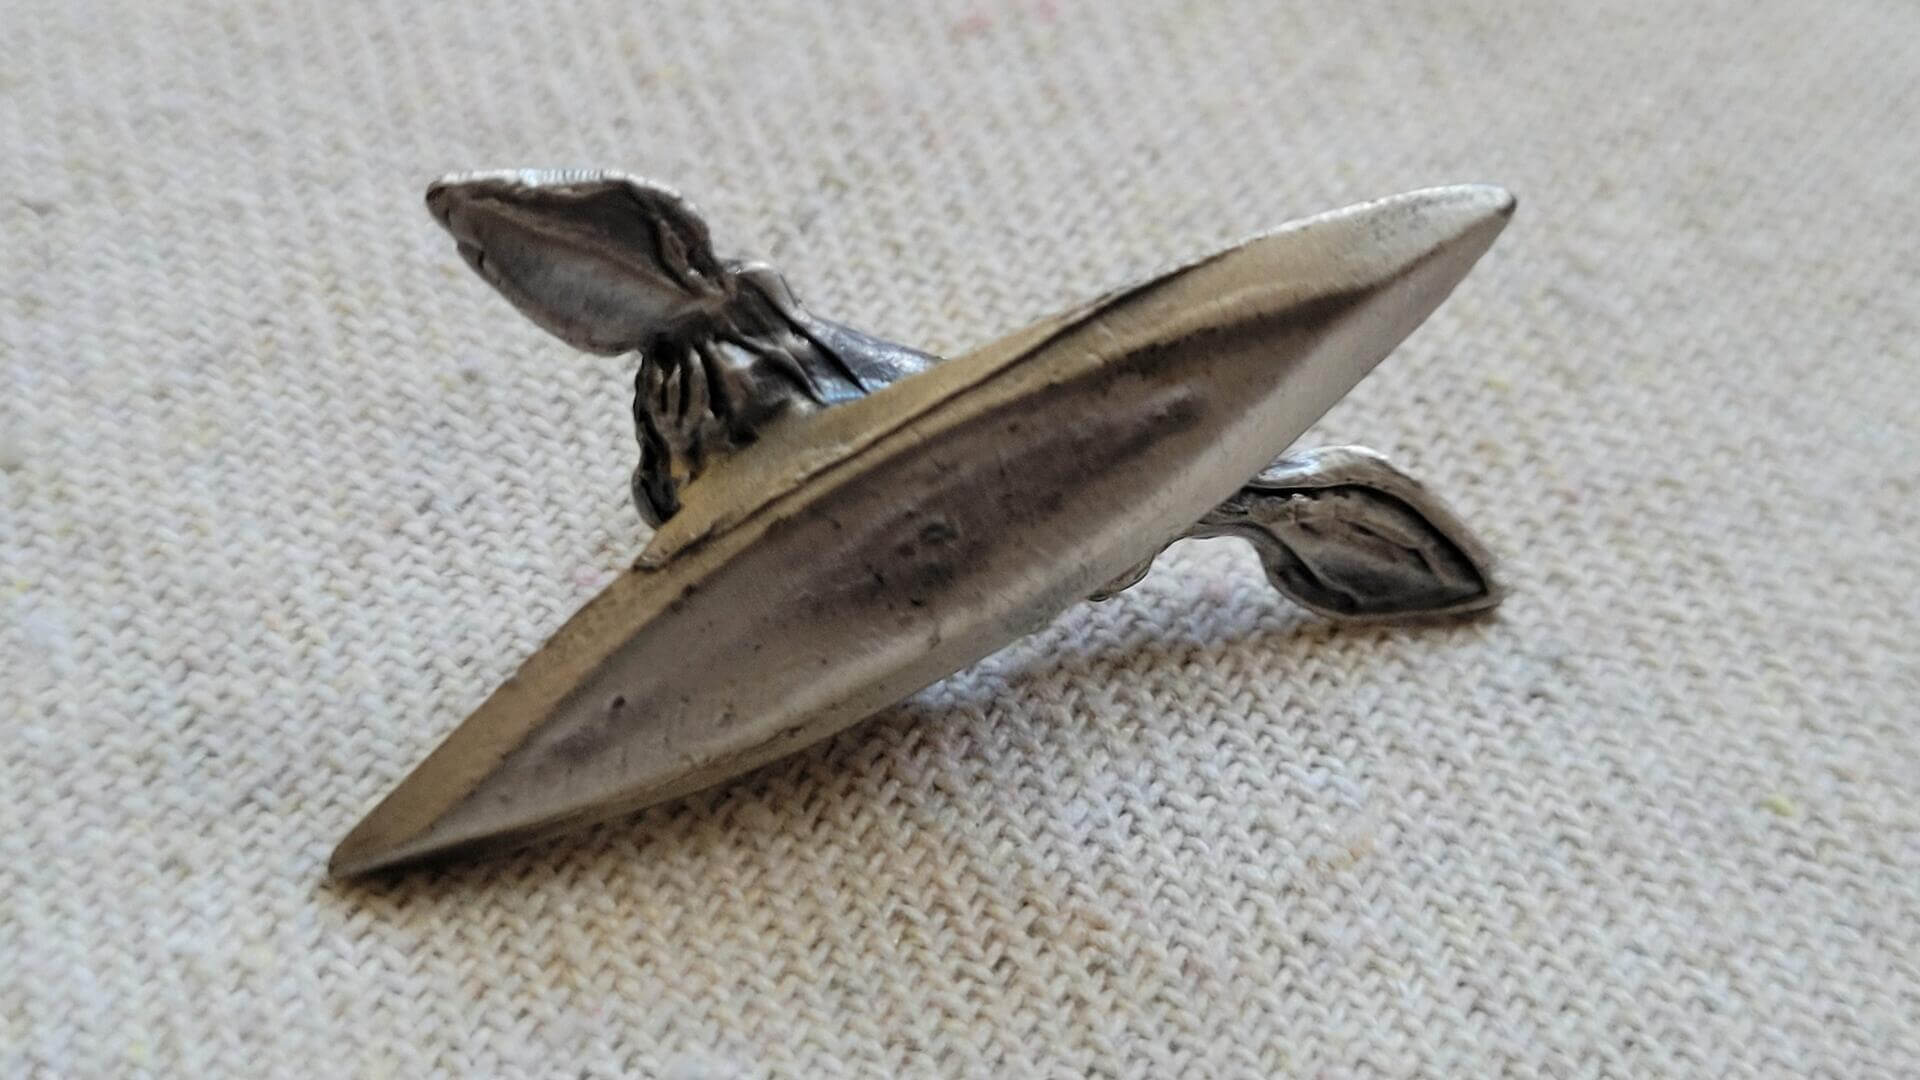 Vintage Inuit Hunter in Kayak miniature pewter sculpture 1.5 inches small - Rare Inuit native folk art and Canadiana collectible art piece